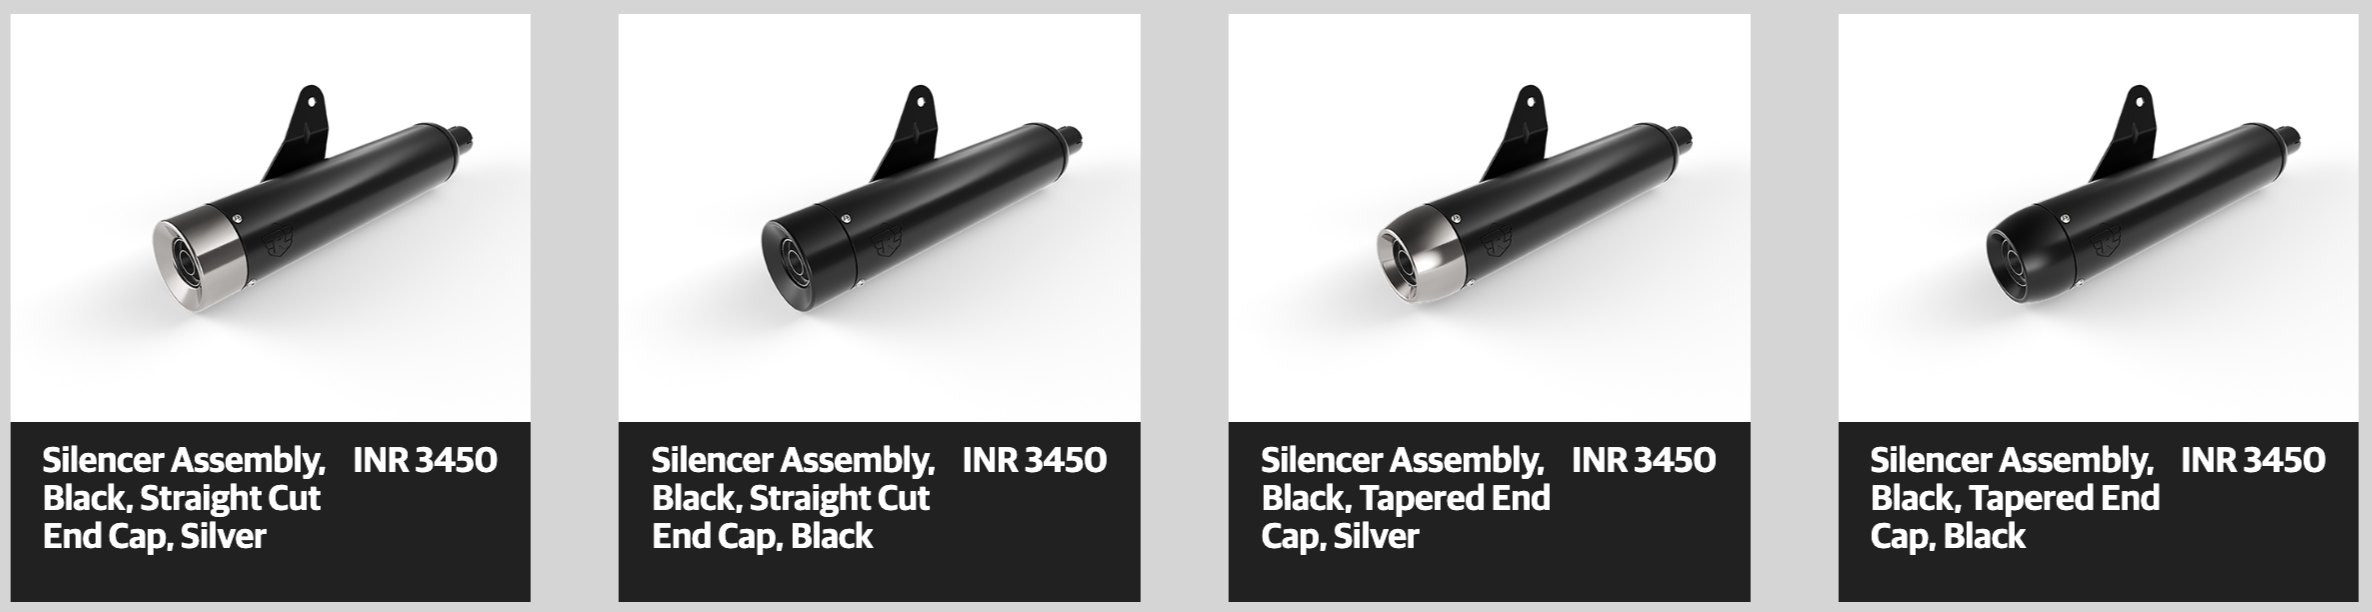 BS3 and BS4 Royal Enfield Classic 350 Silencers Price List - midground